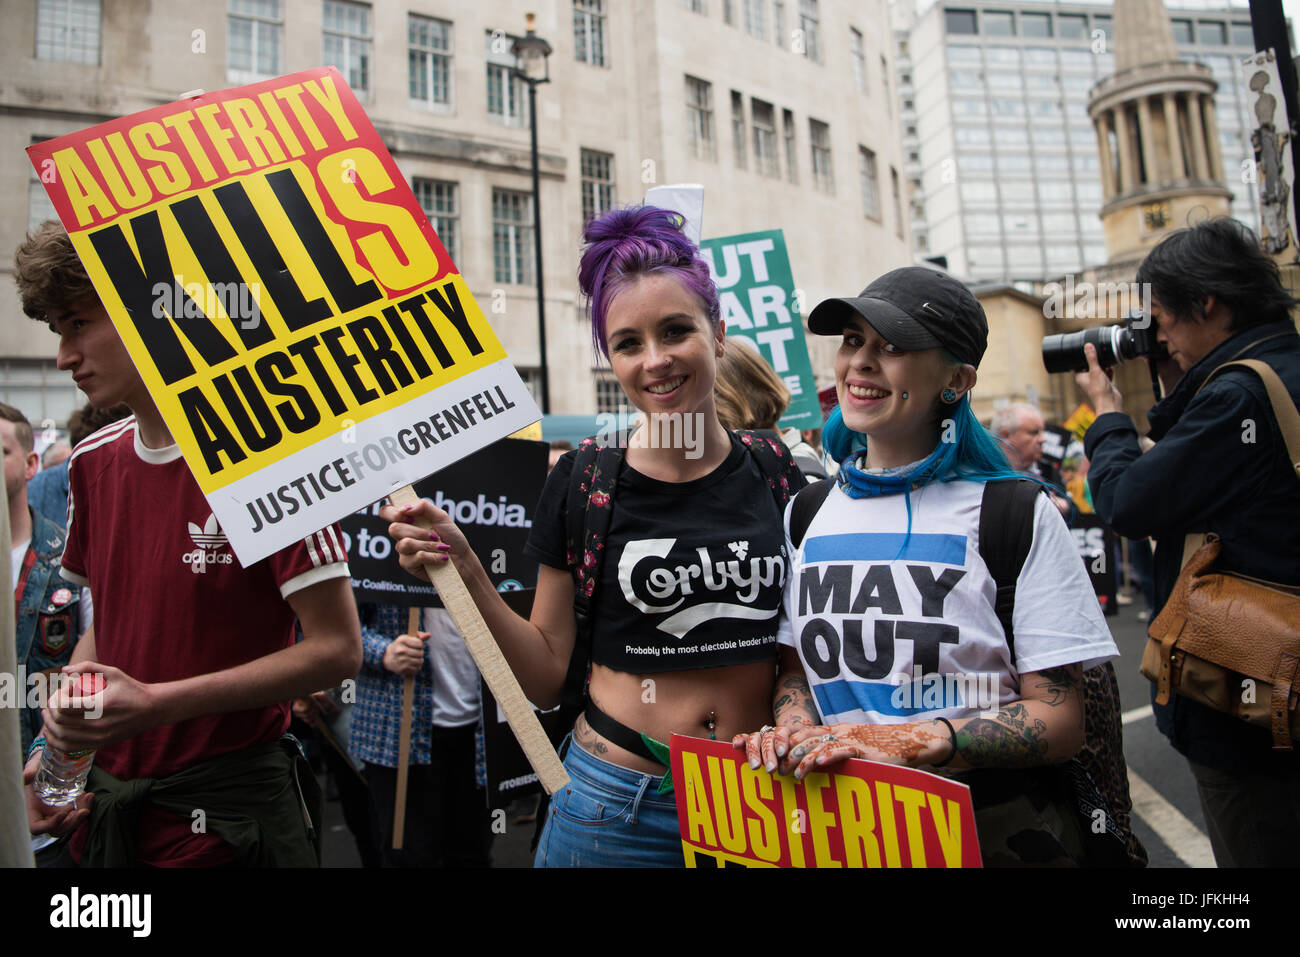 London, UK. 1st Jul, 2017. Protesters on Regent Street, during the 'Not One Day More' demonstration against the Conservative government. Thousands of protesters marched from Regent Street to Parliament Square, with Diane Abbott, John McDonnell and Jeremy Corbyn giving speechs. Credit: Jacob Sacks-Jones/Alamy Live News. Stock Photo